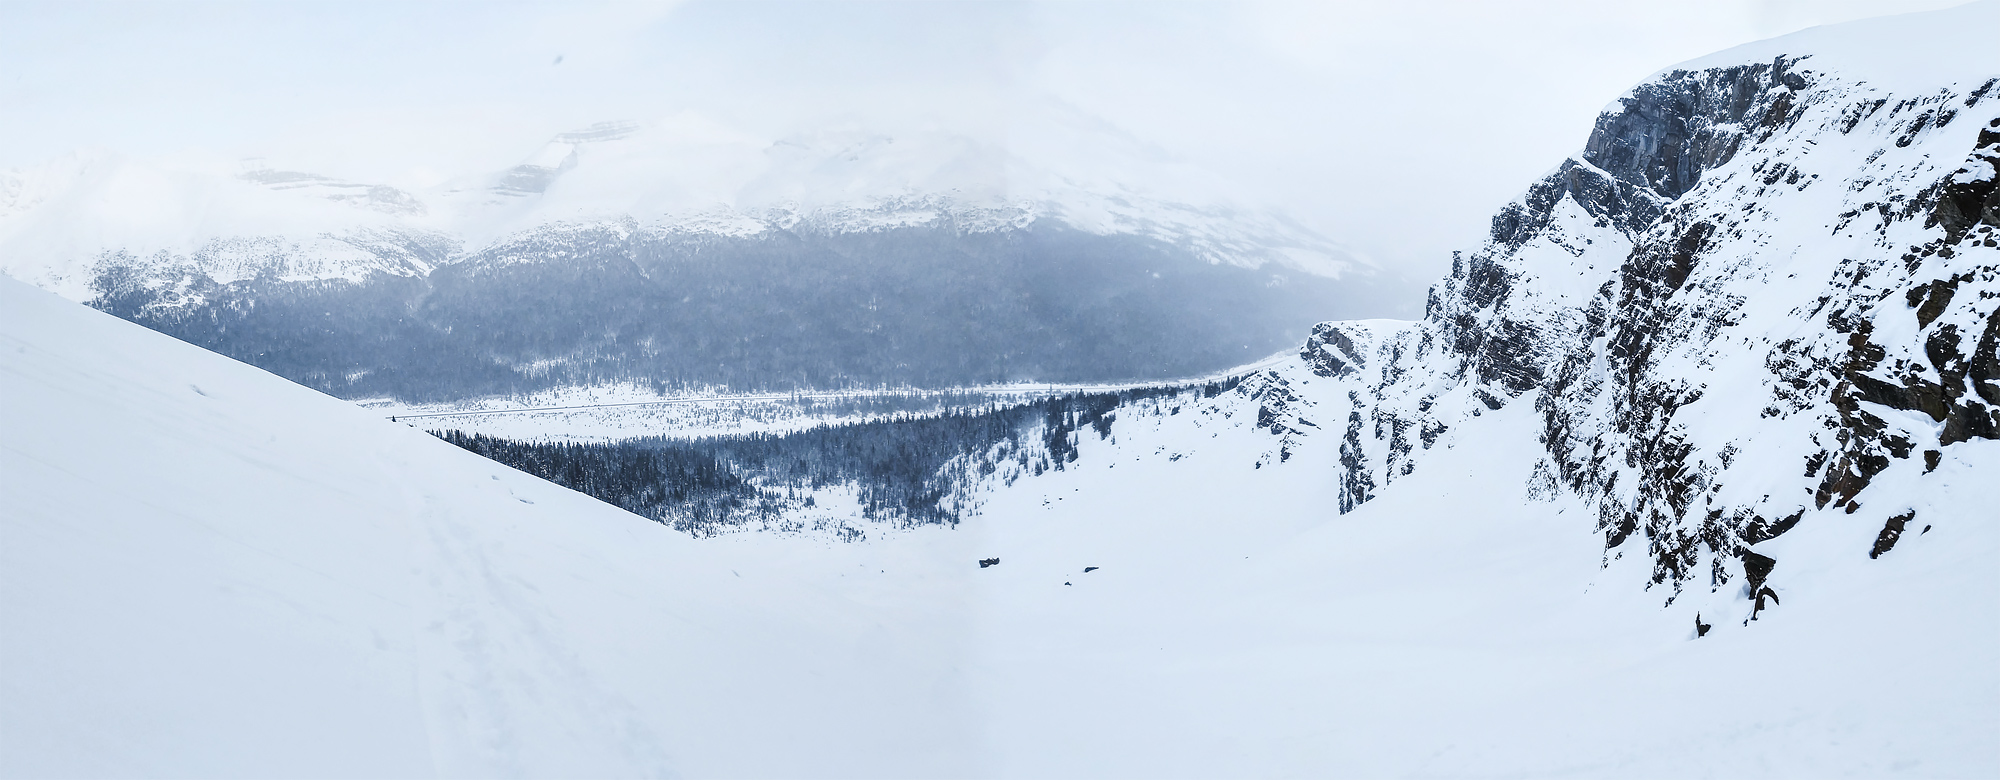 Panorama from the top of Jimmy Jr. Bowl